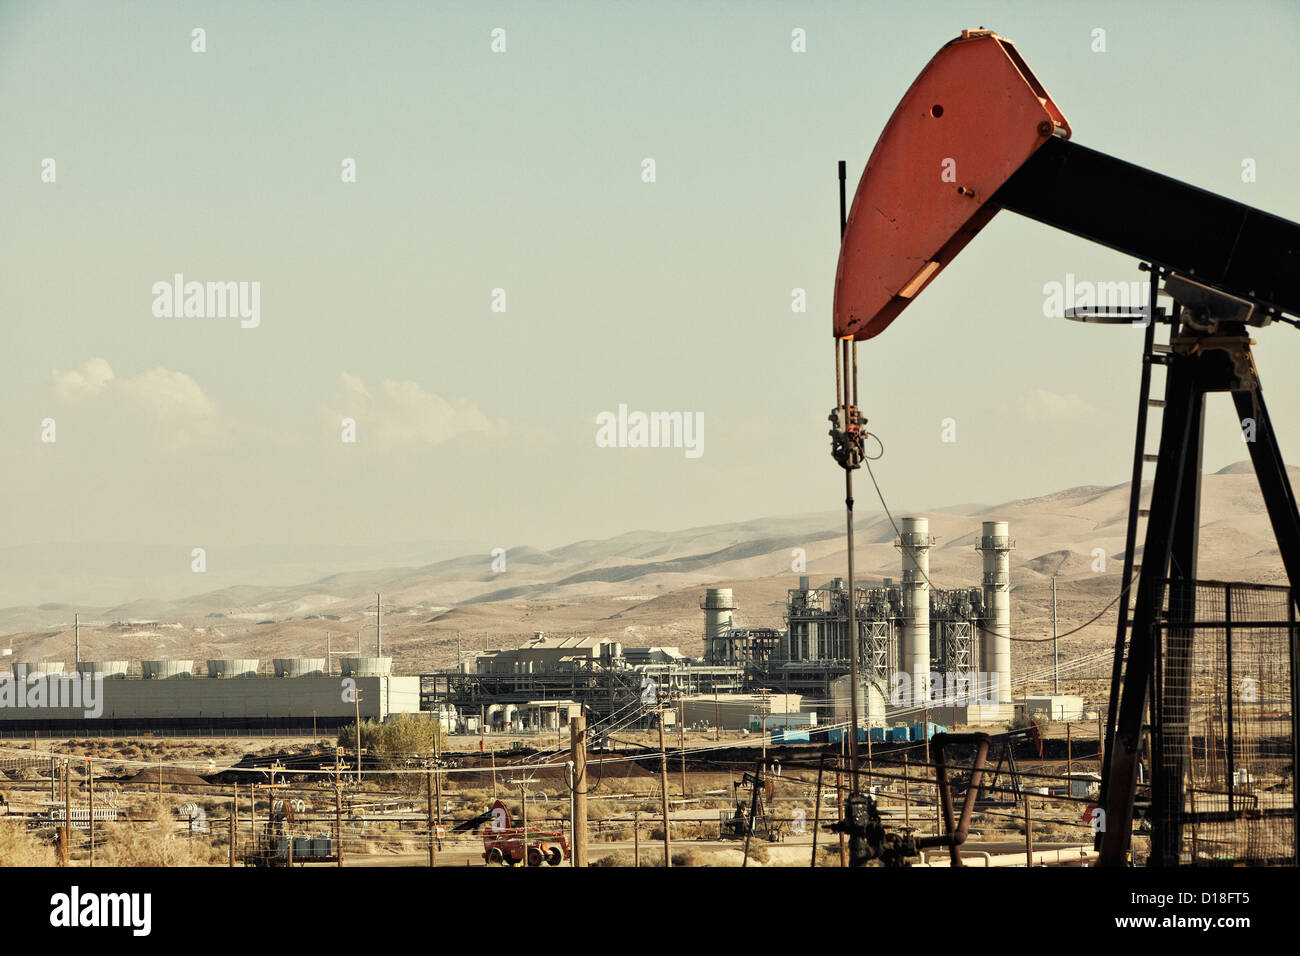 Oil pump and refinery in oil field Stock Photo